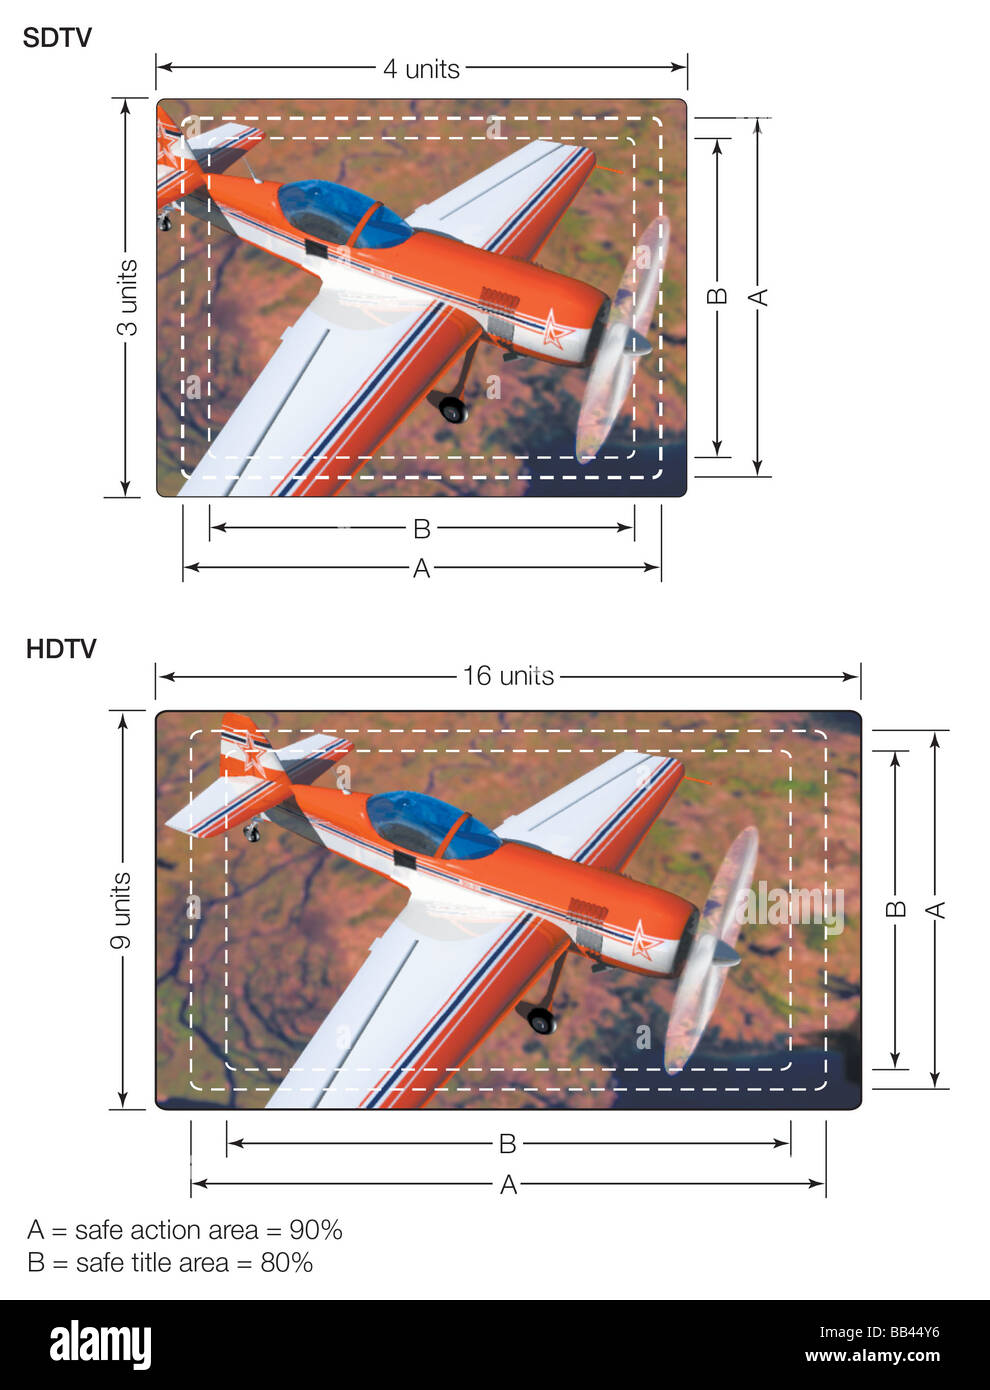 A comparison of the aspect ratios of standard-definition (SDTV) and high-definition (HDTV) picture tubes. Stock Photo